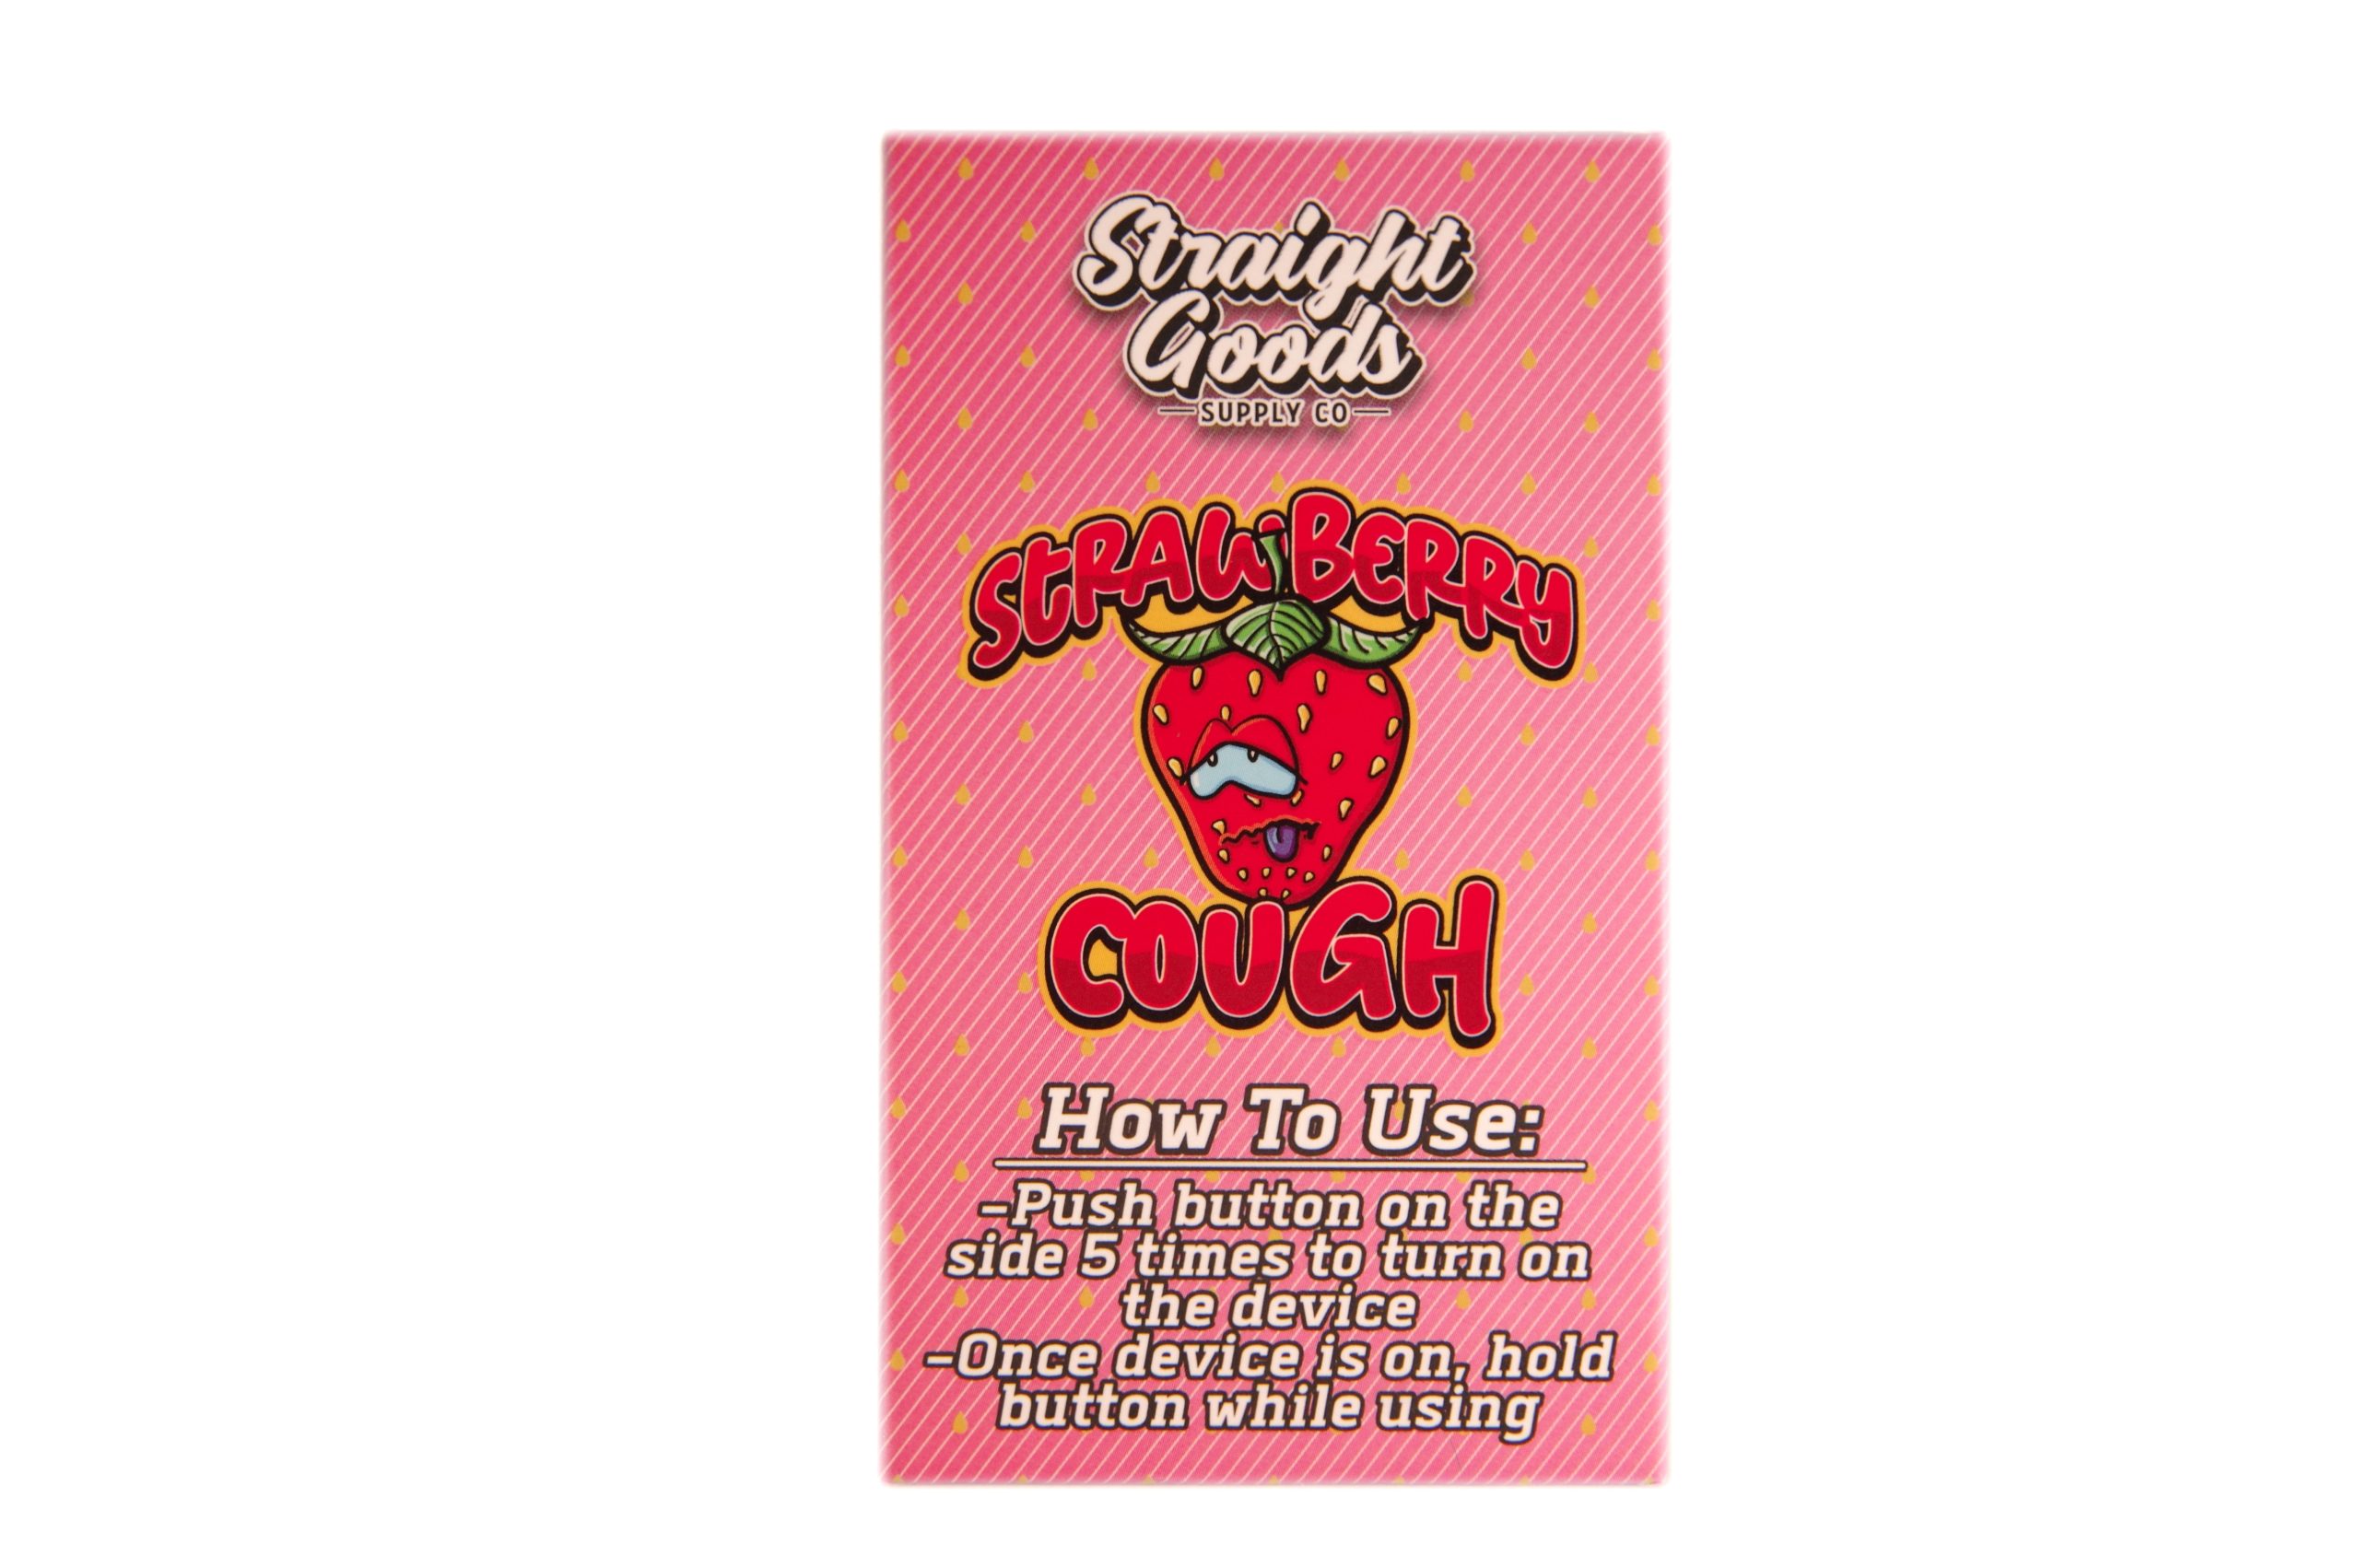 Buy Straight Goods – Strawberry Cough 3G Disposable online Canada